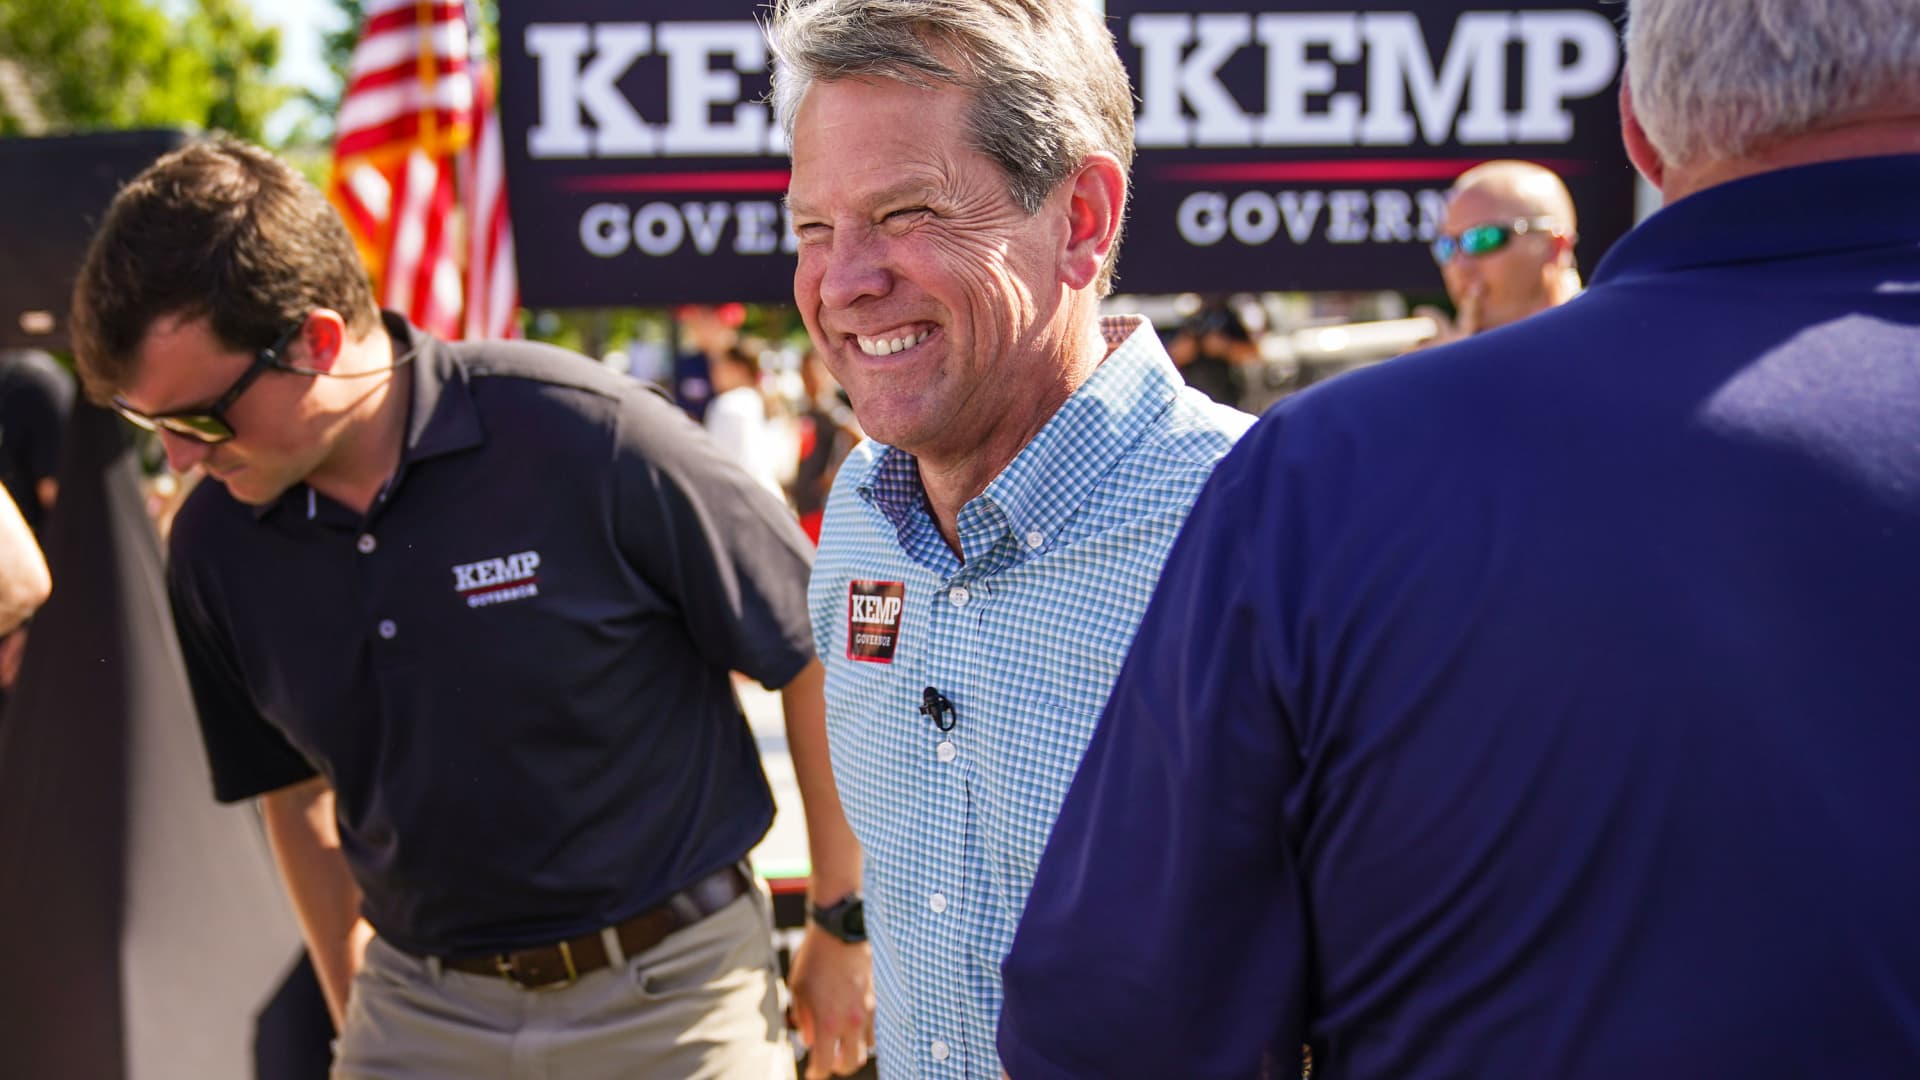 Georgia Gov. Brian Kemp beats Trump pick Perdue in GOP governor primary race will face Democrat Abrams NBC projects – CNBC